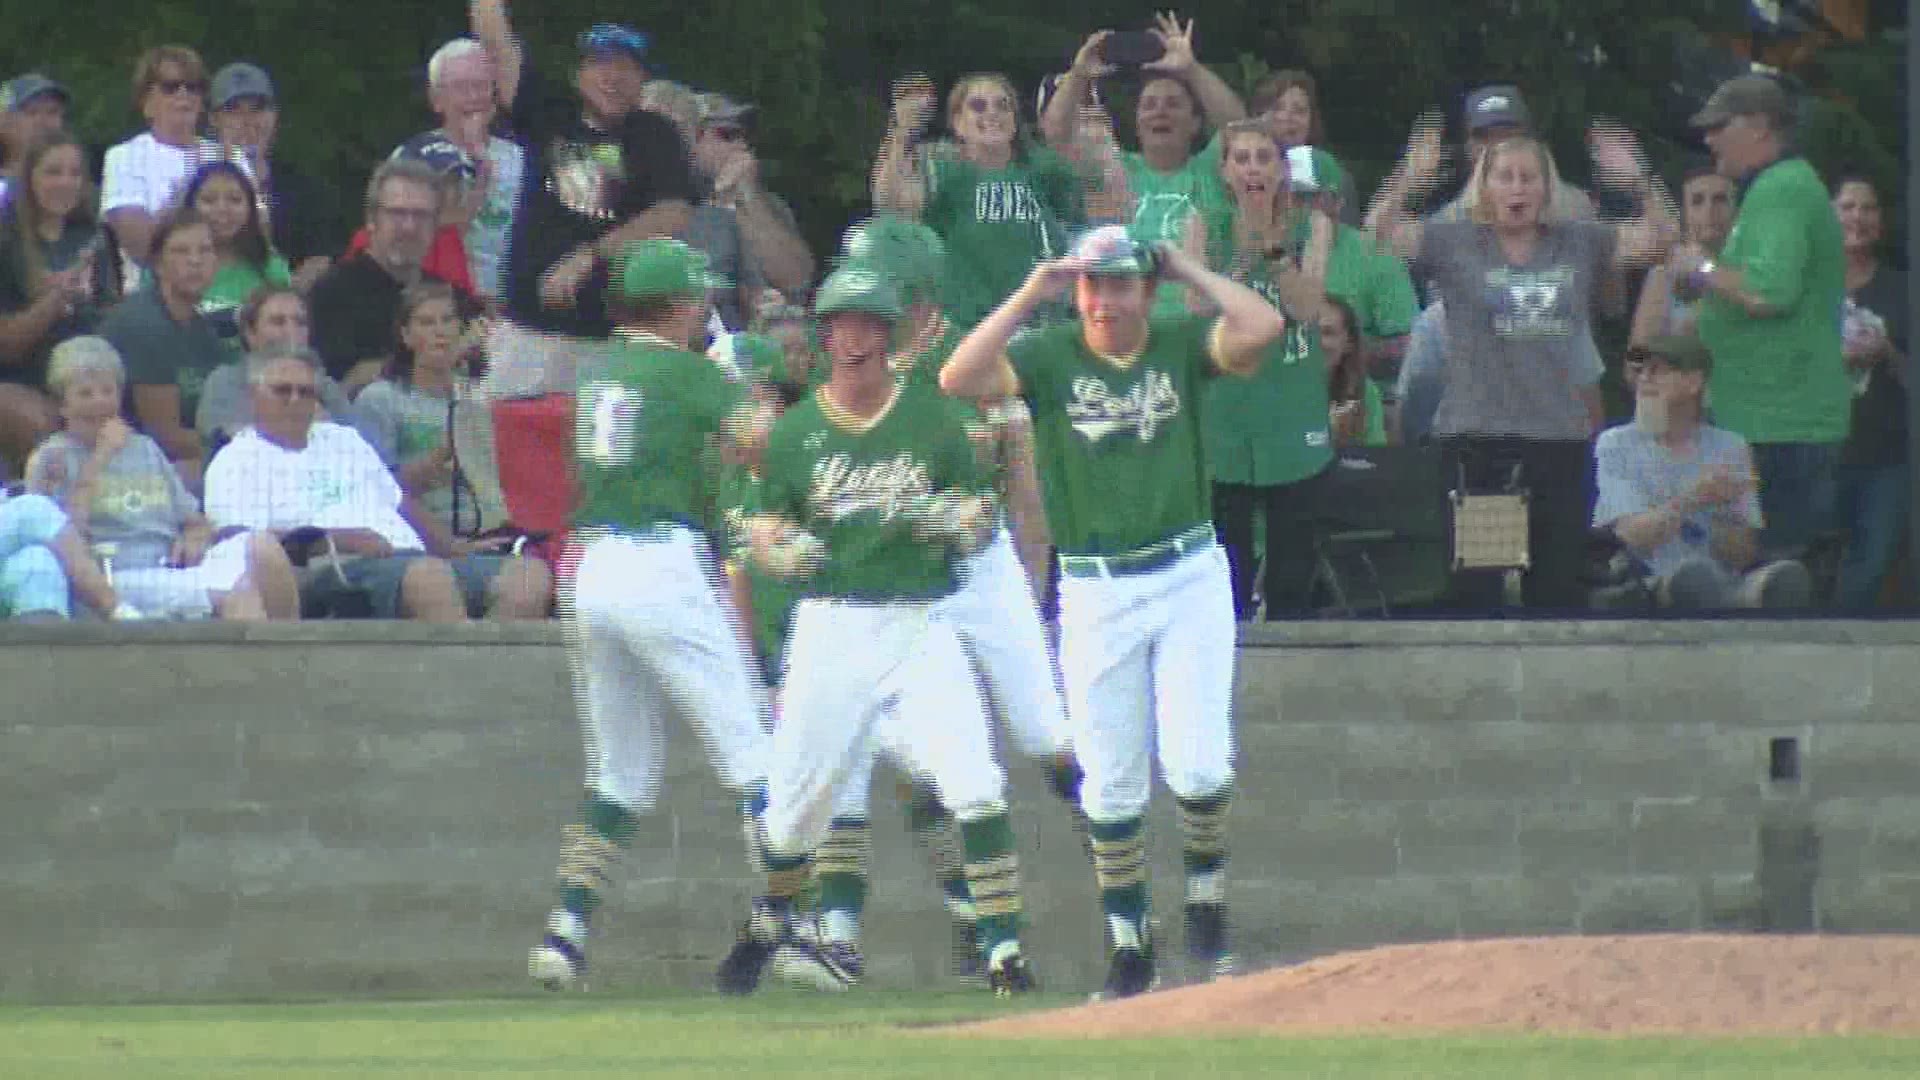 Geneseo rolls to a 13-3 win over Dixon in the Sectional Championship.